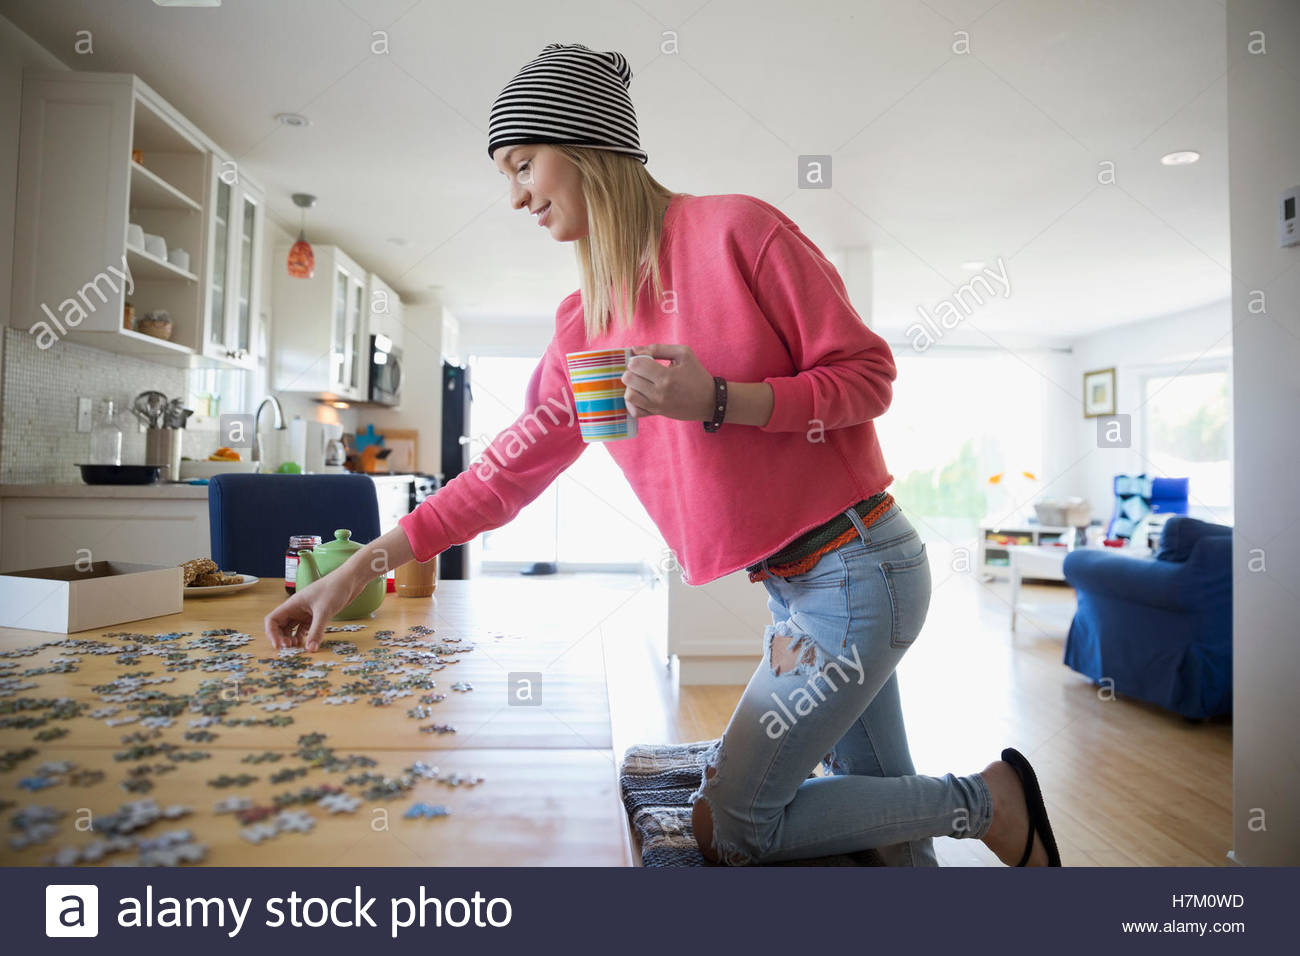 Young woman drinking coffee and assembling jigsaw puzzle at table Stock Photo